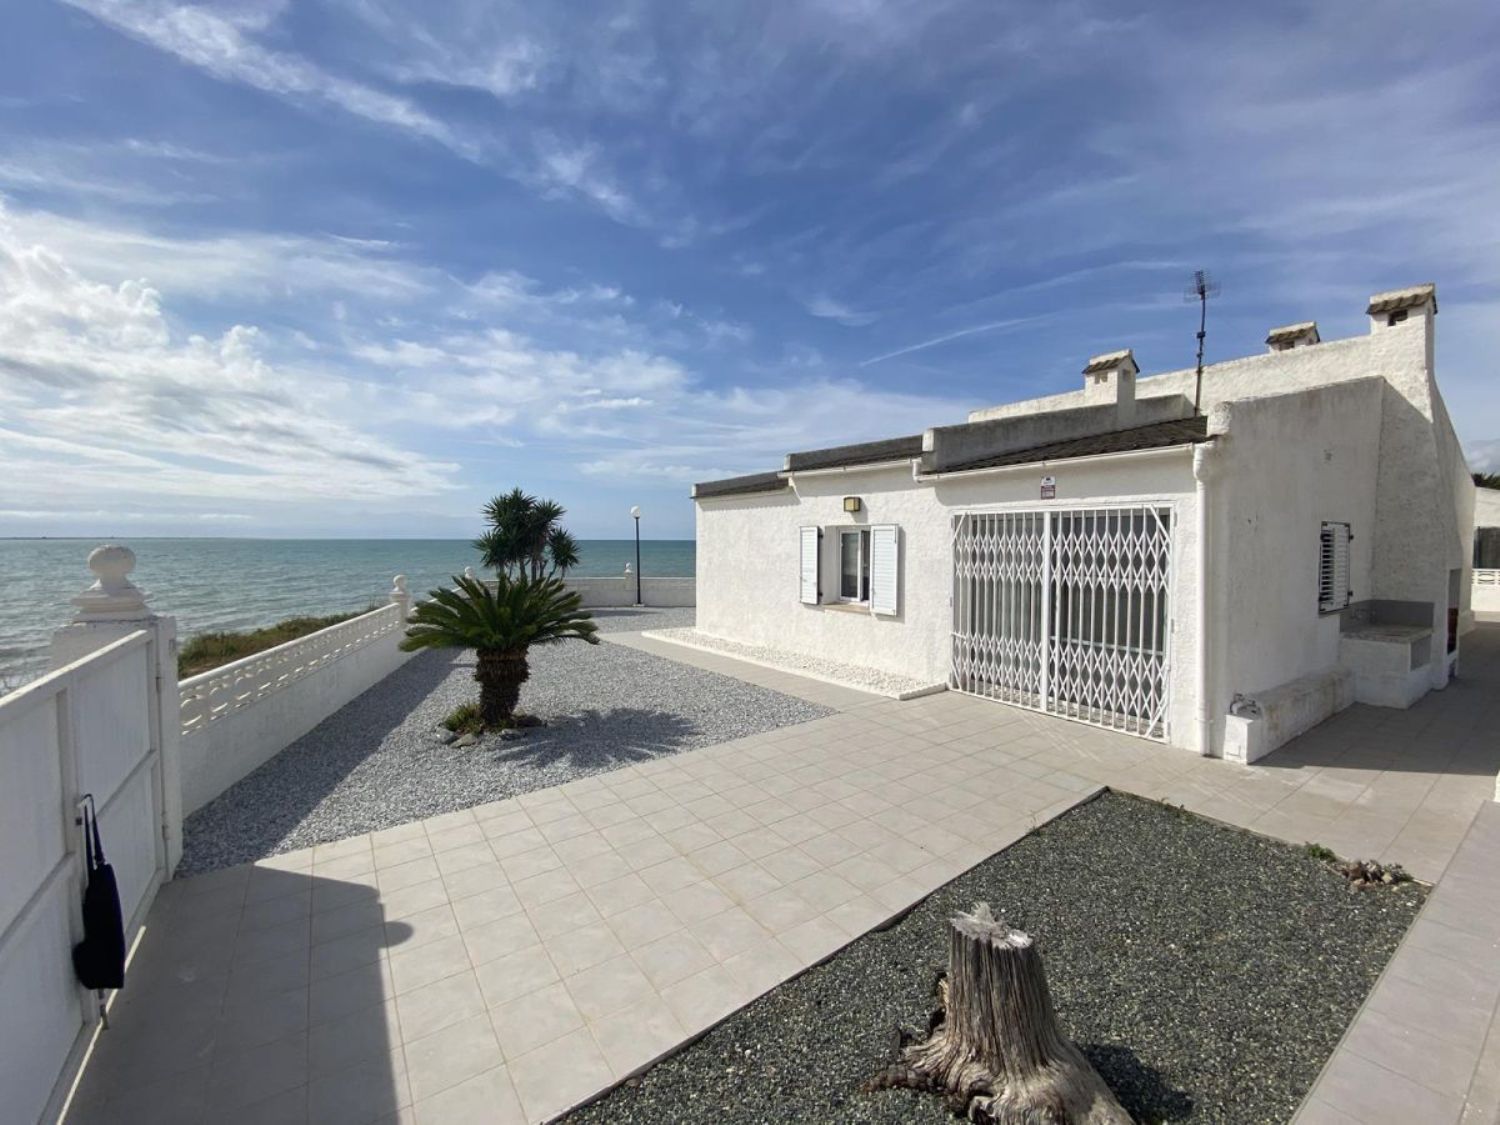 Semi-Detached house for sale on the seafront in Les Cases d'Alcanar, in Alcanar